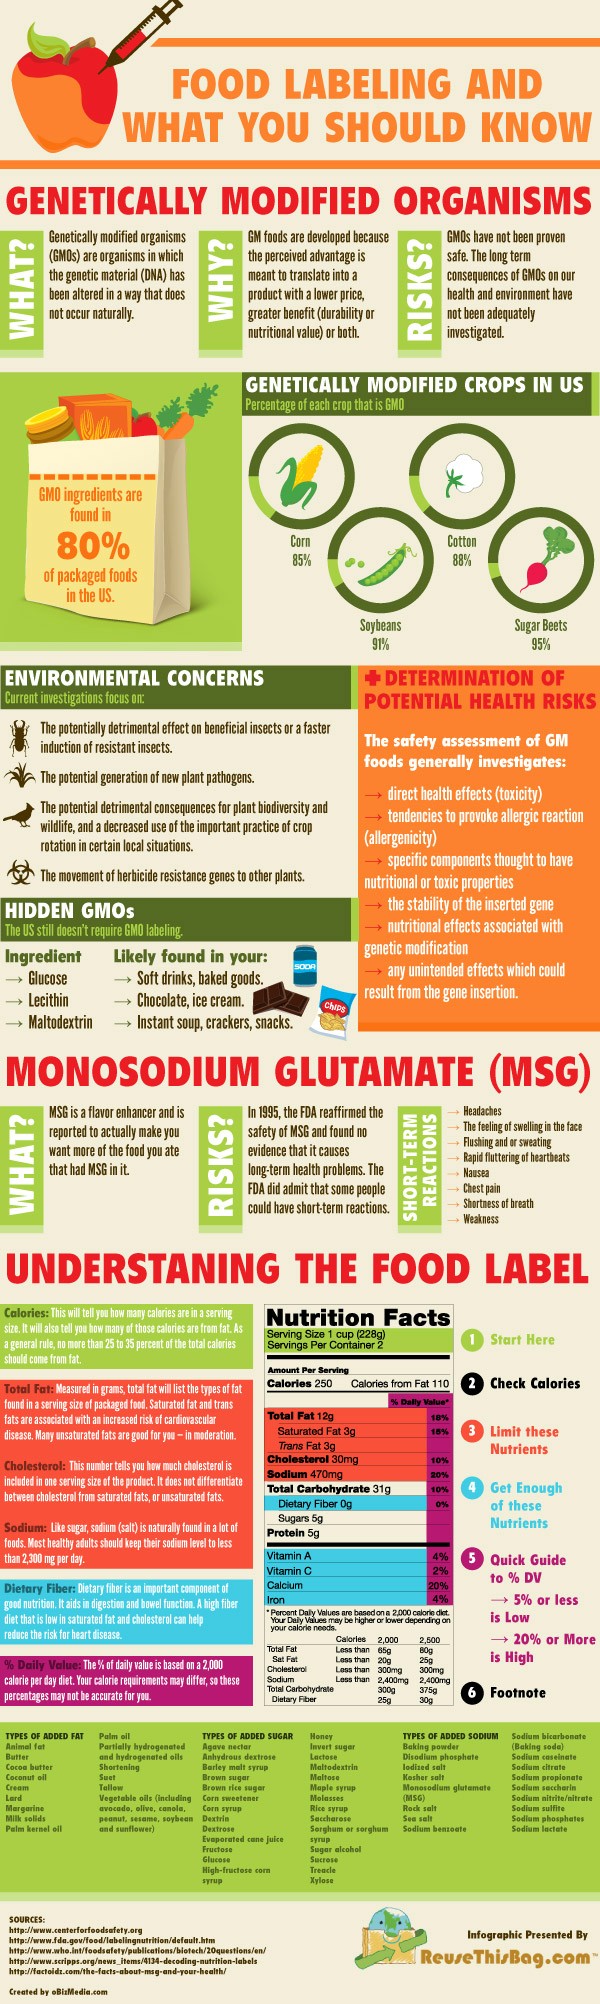 Food Labeling and What You Should Know